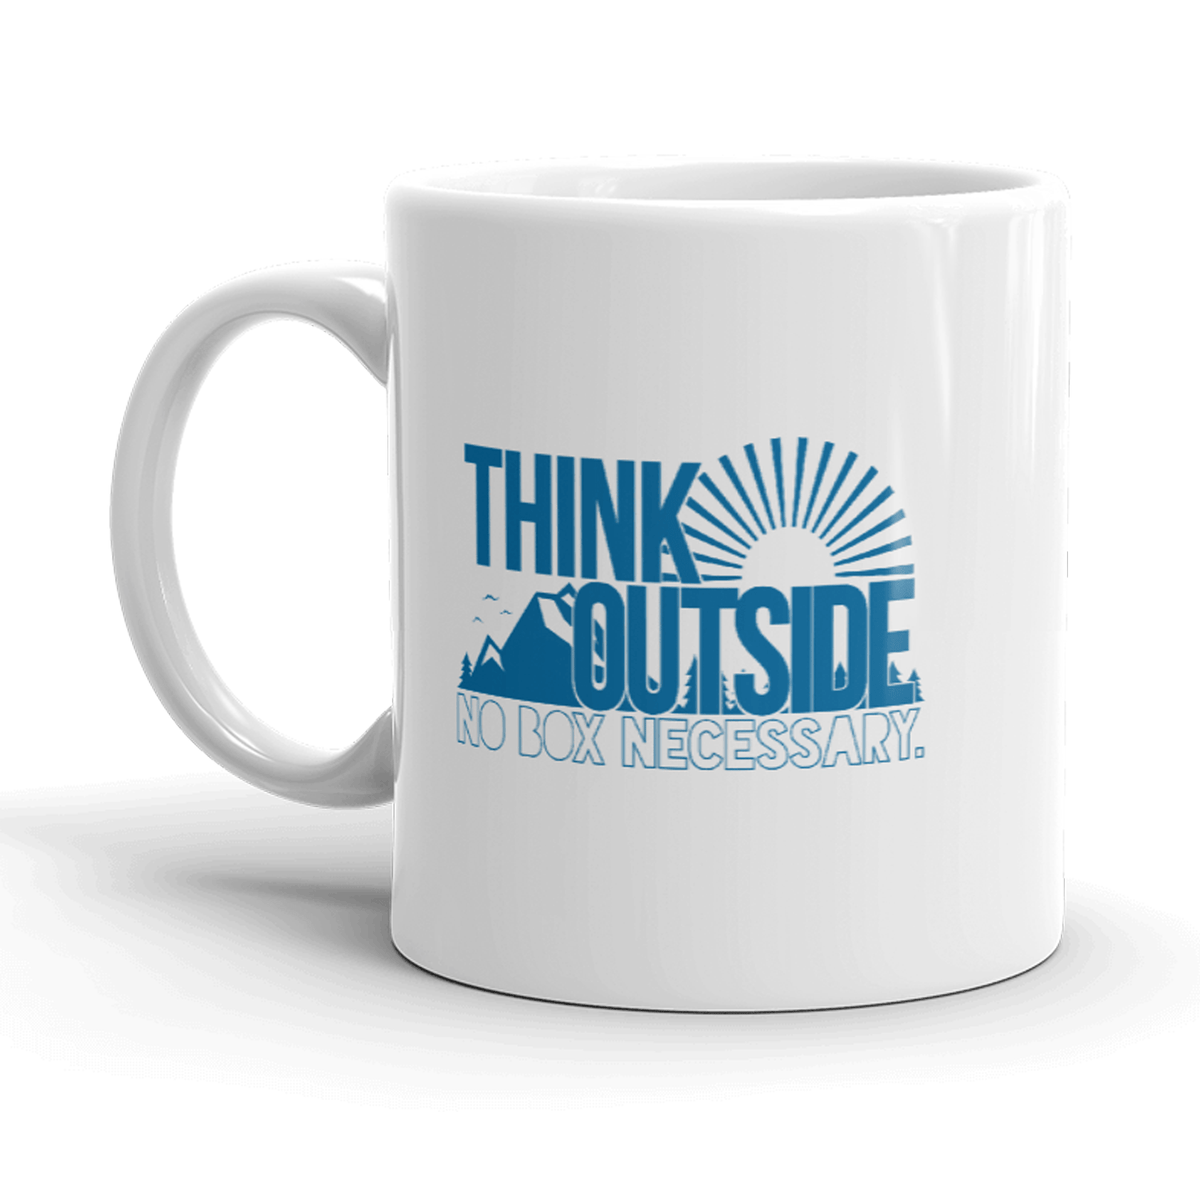 Think Outside No Box Necessary Mug Funny Cool Camping Graphic Coffee Cup-11oz - Crazy Dog T-Shirts